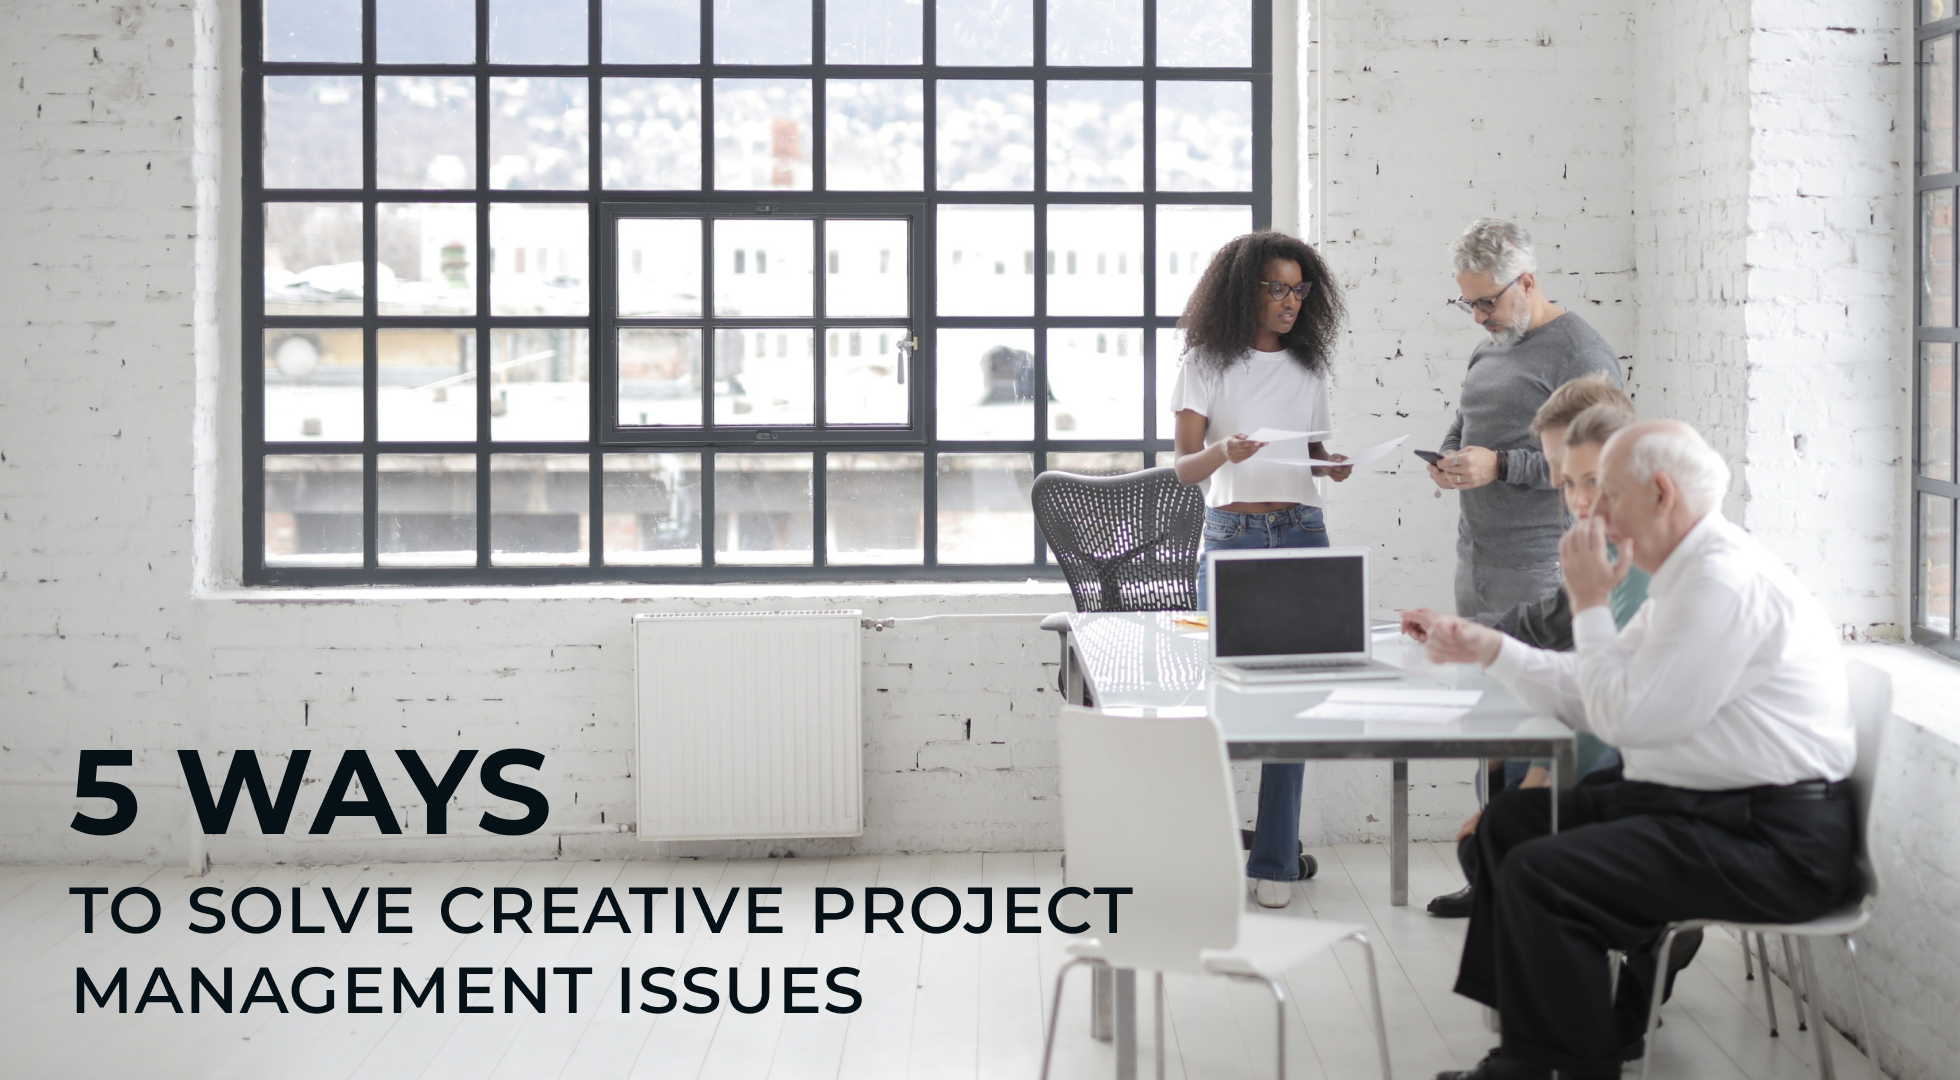 5 Ways to Solve Creative Project Management Issues